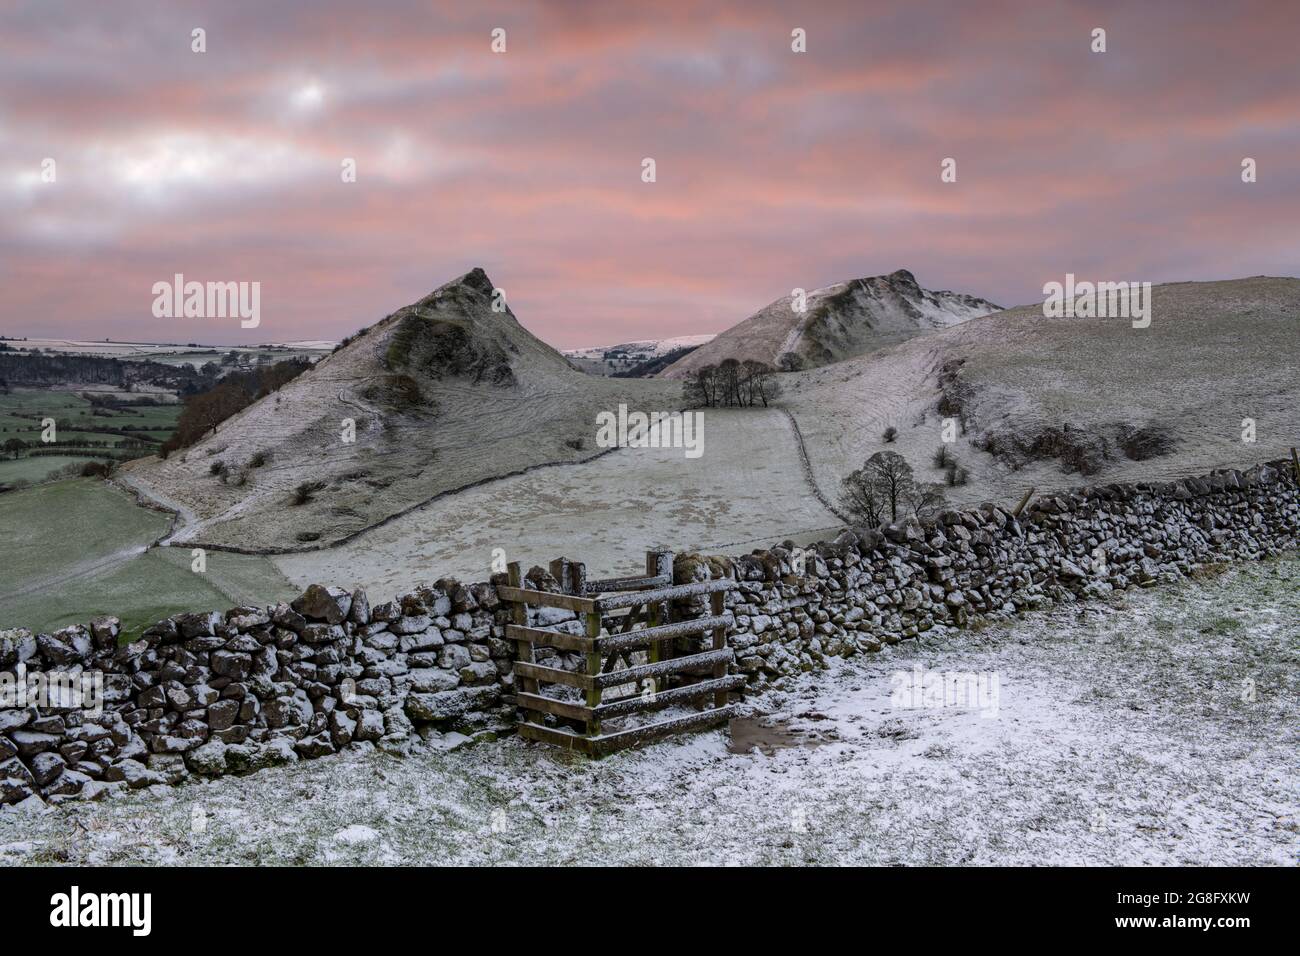 The view of Chrome Hill and Parkhouse Hill with dusting of snow, Peak District, Derbyshire, England, United Kingdom, Europe Stock Photo